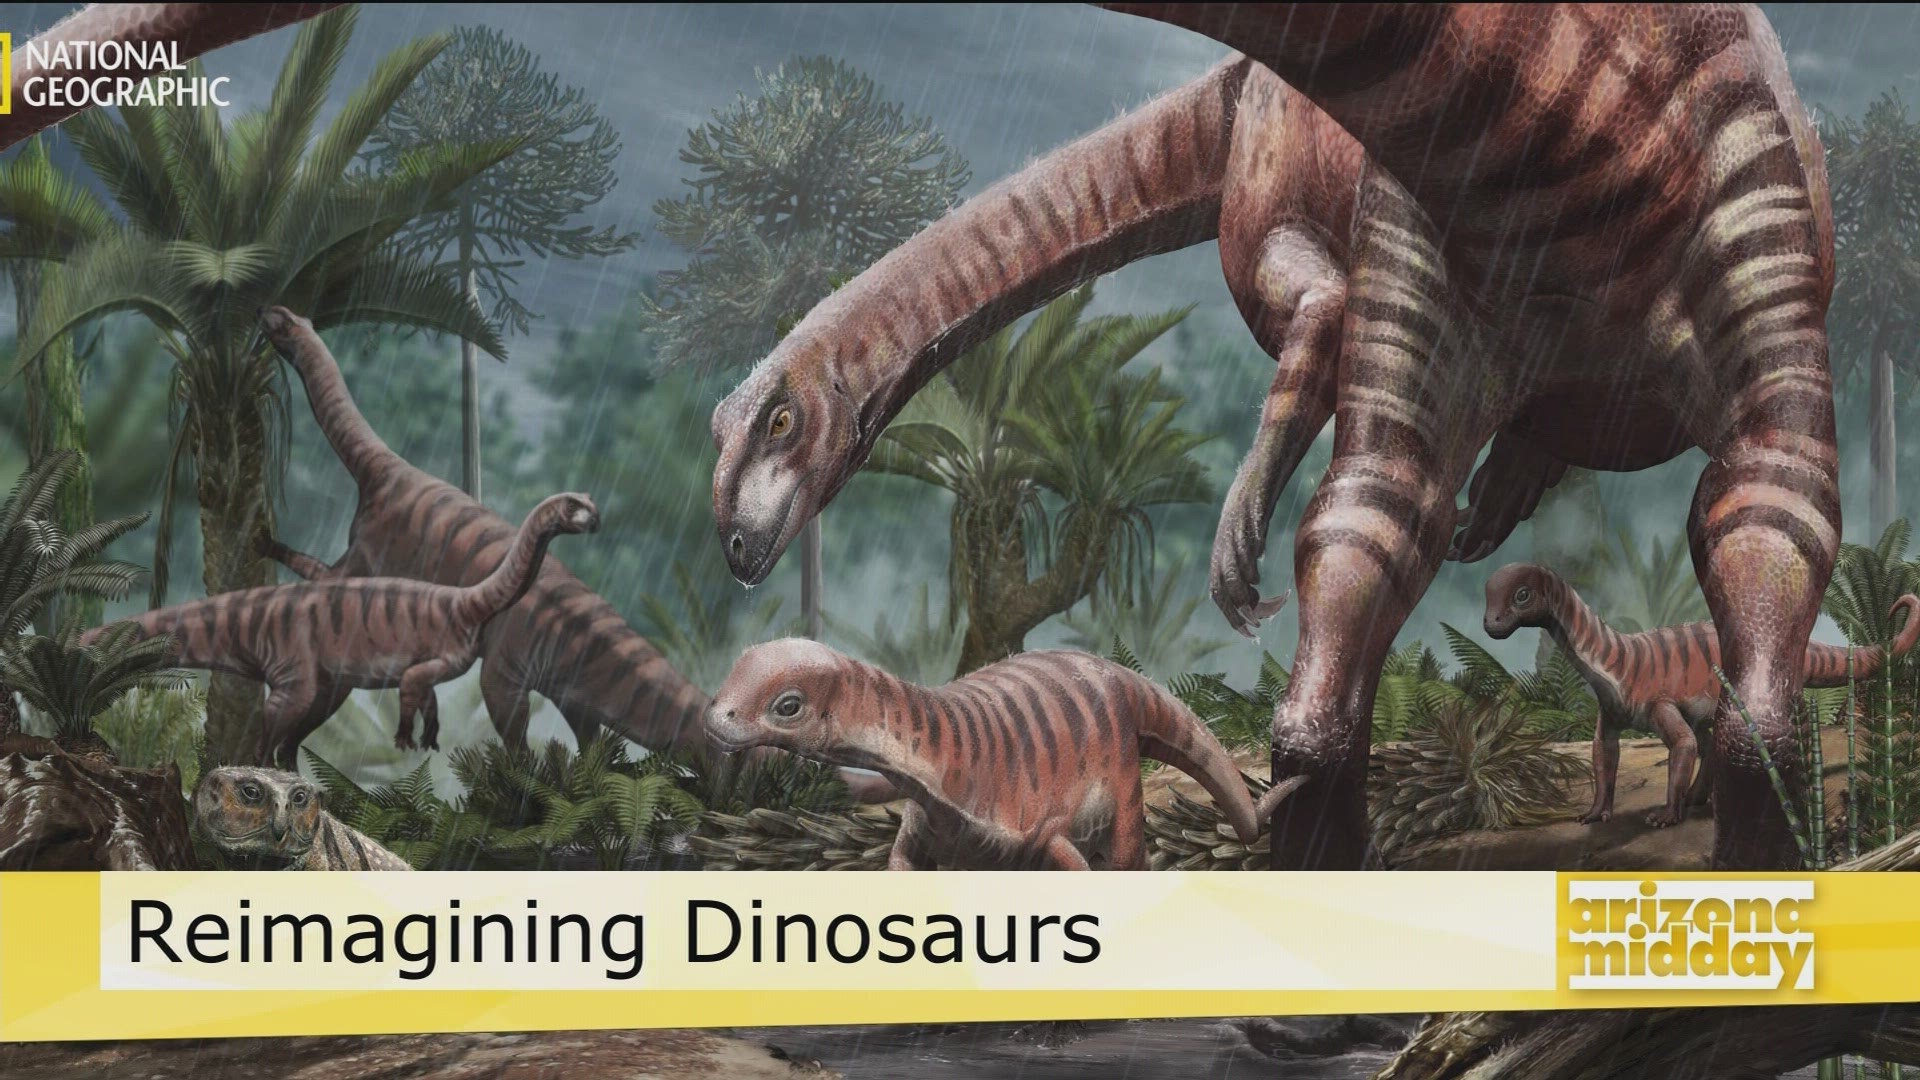 Rachel Buchholz with National Geographic shows us some of the latest dino discoveries and how families can get learning at home with this month's issue!